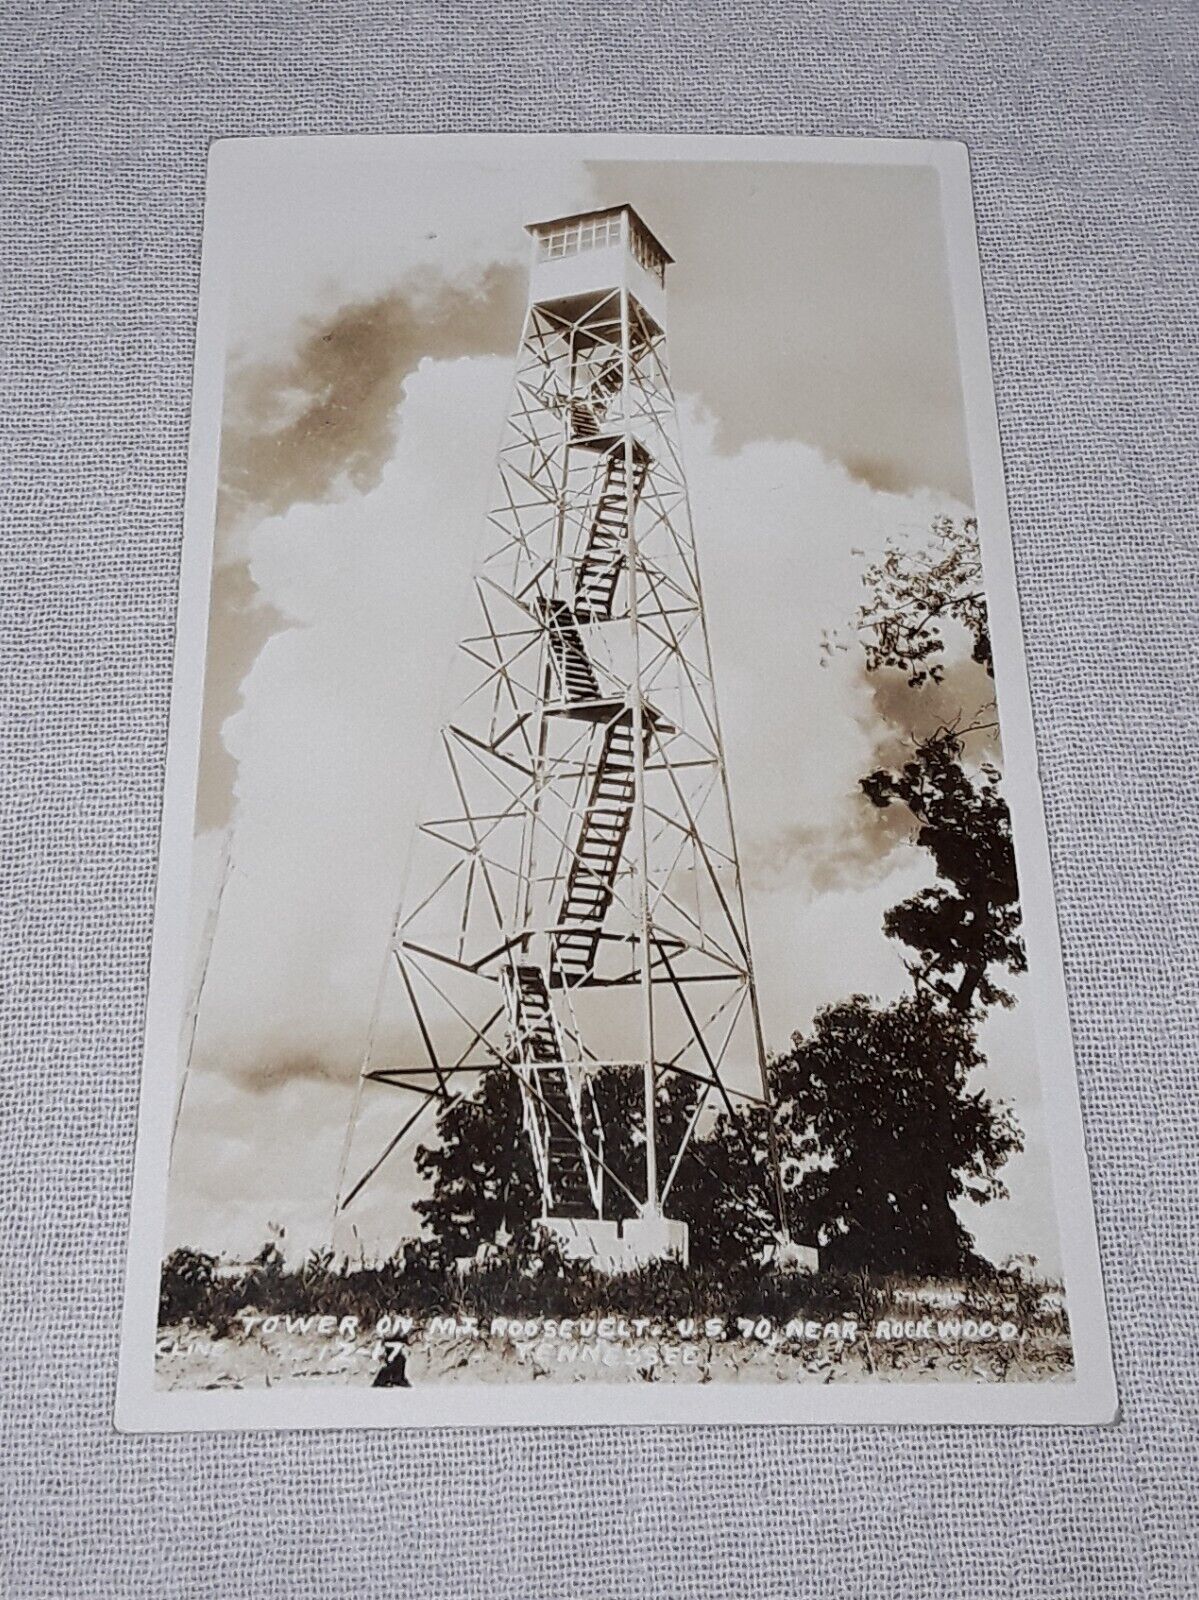 ROCKWOOD TENNESSEE REAL PHOTO POSTCARD RPPC TOWER ON MOUNT ROOSEVELT